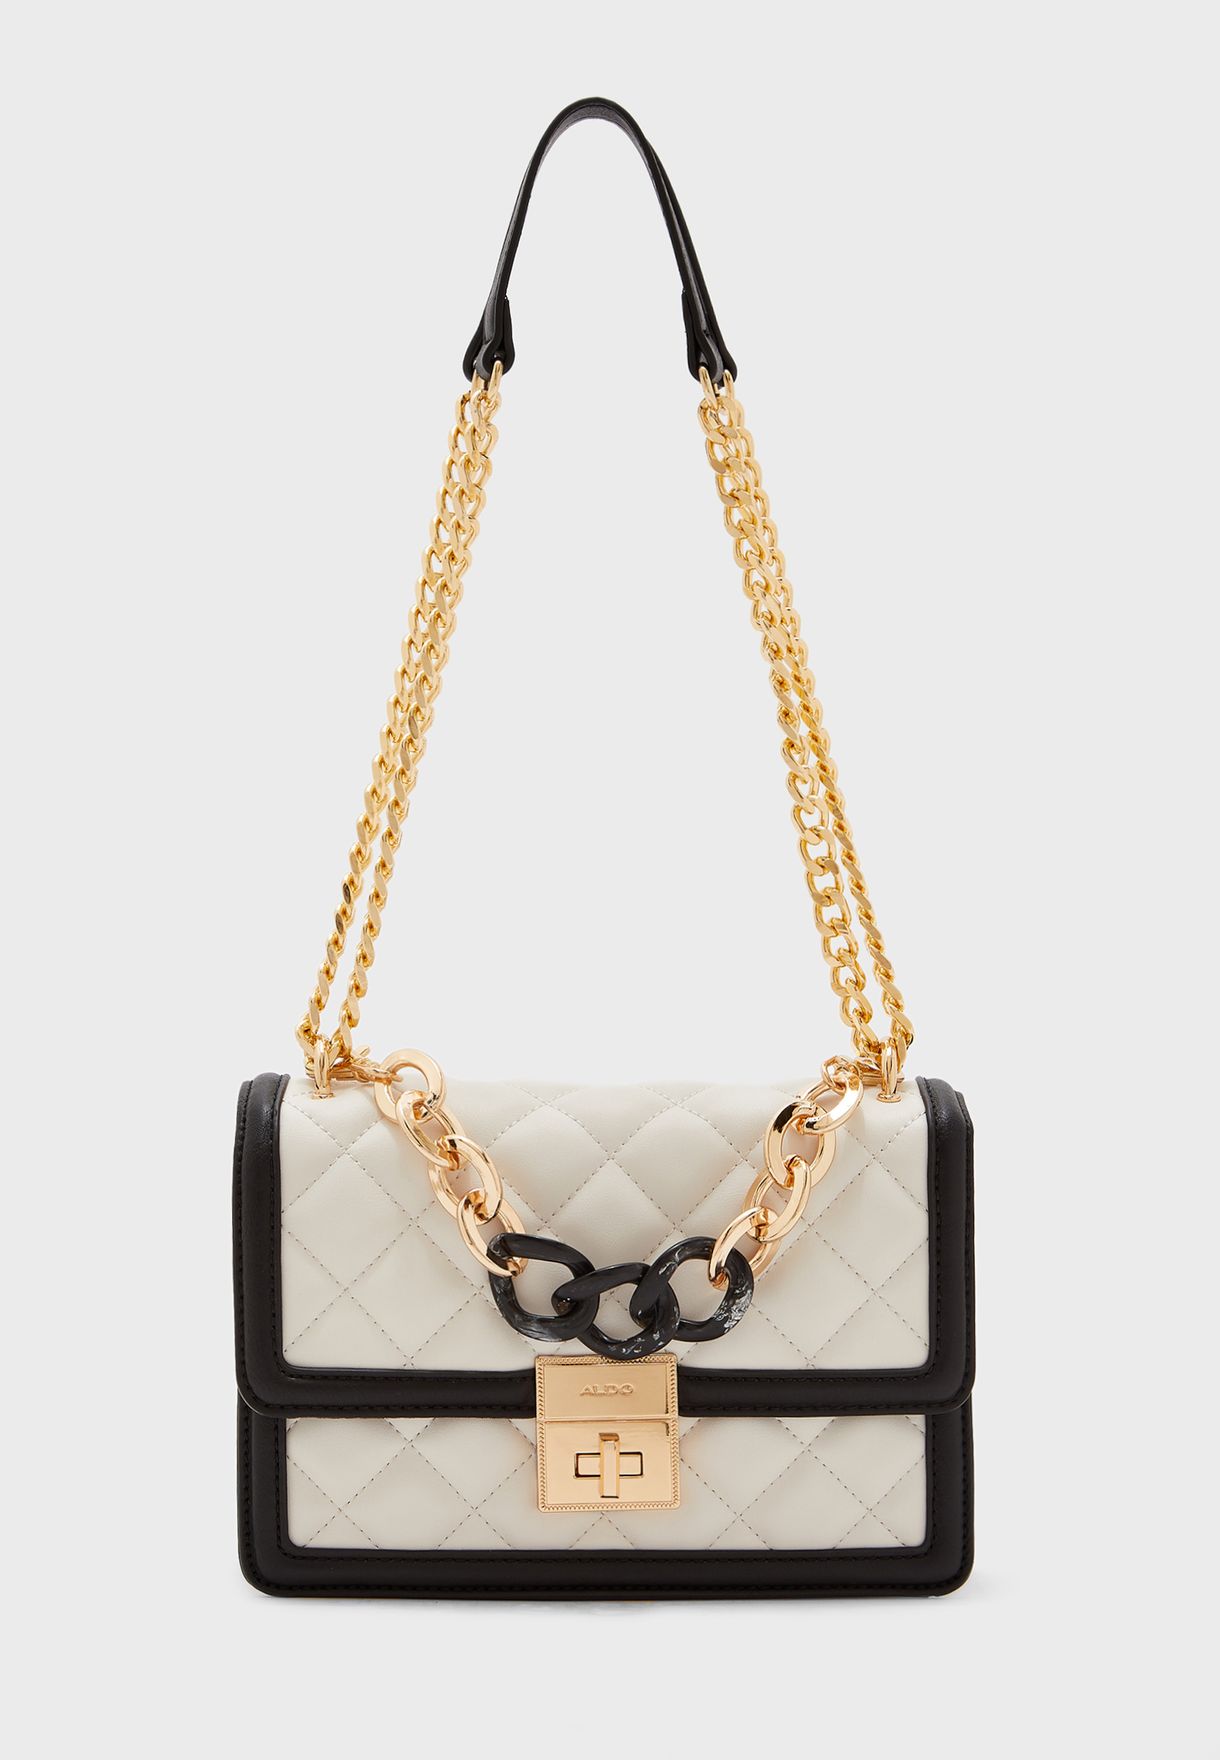 aldo bags new collection